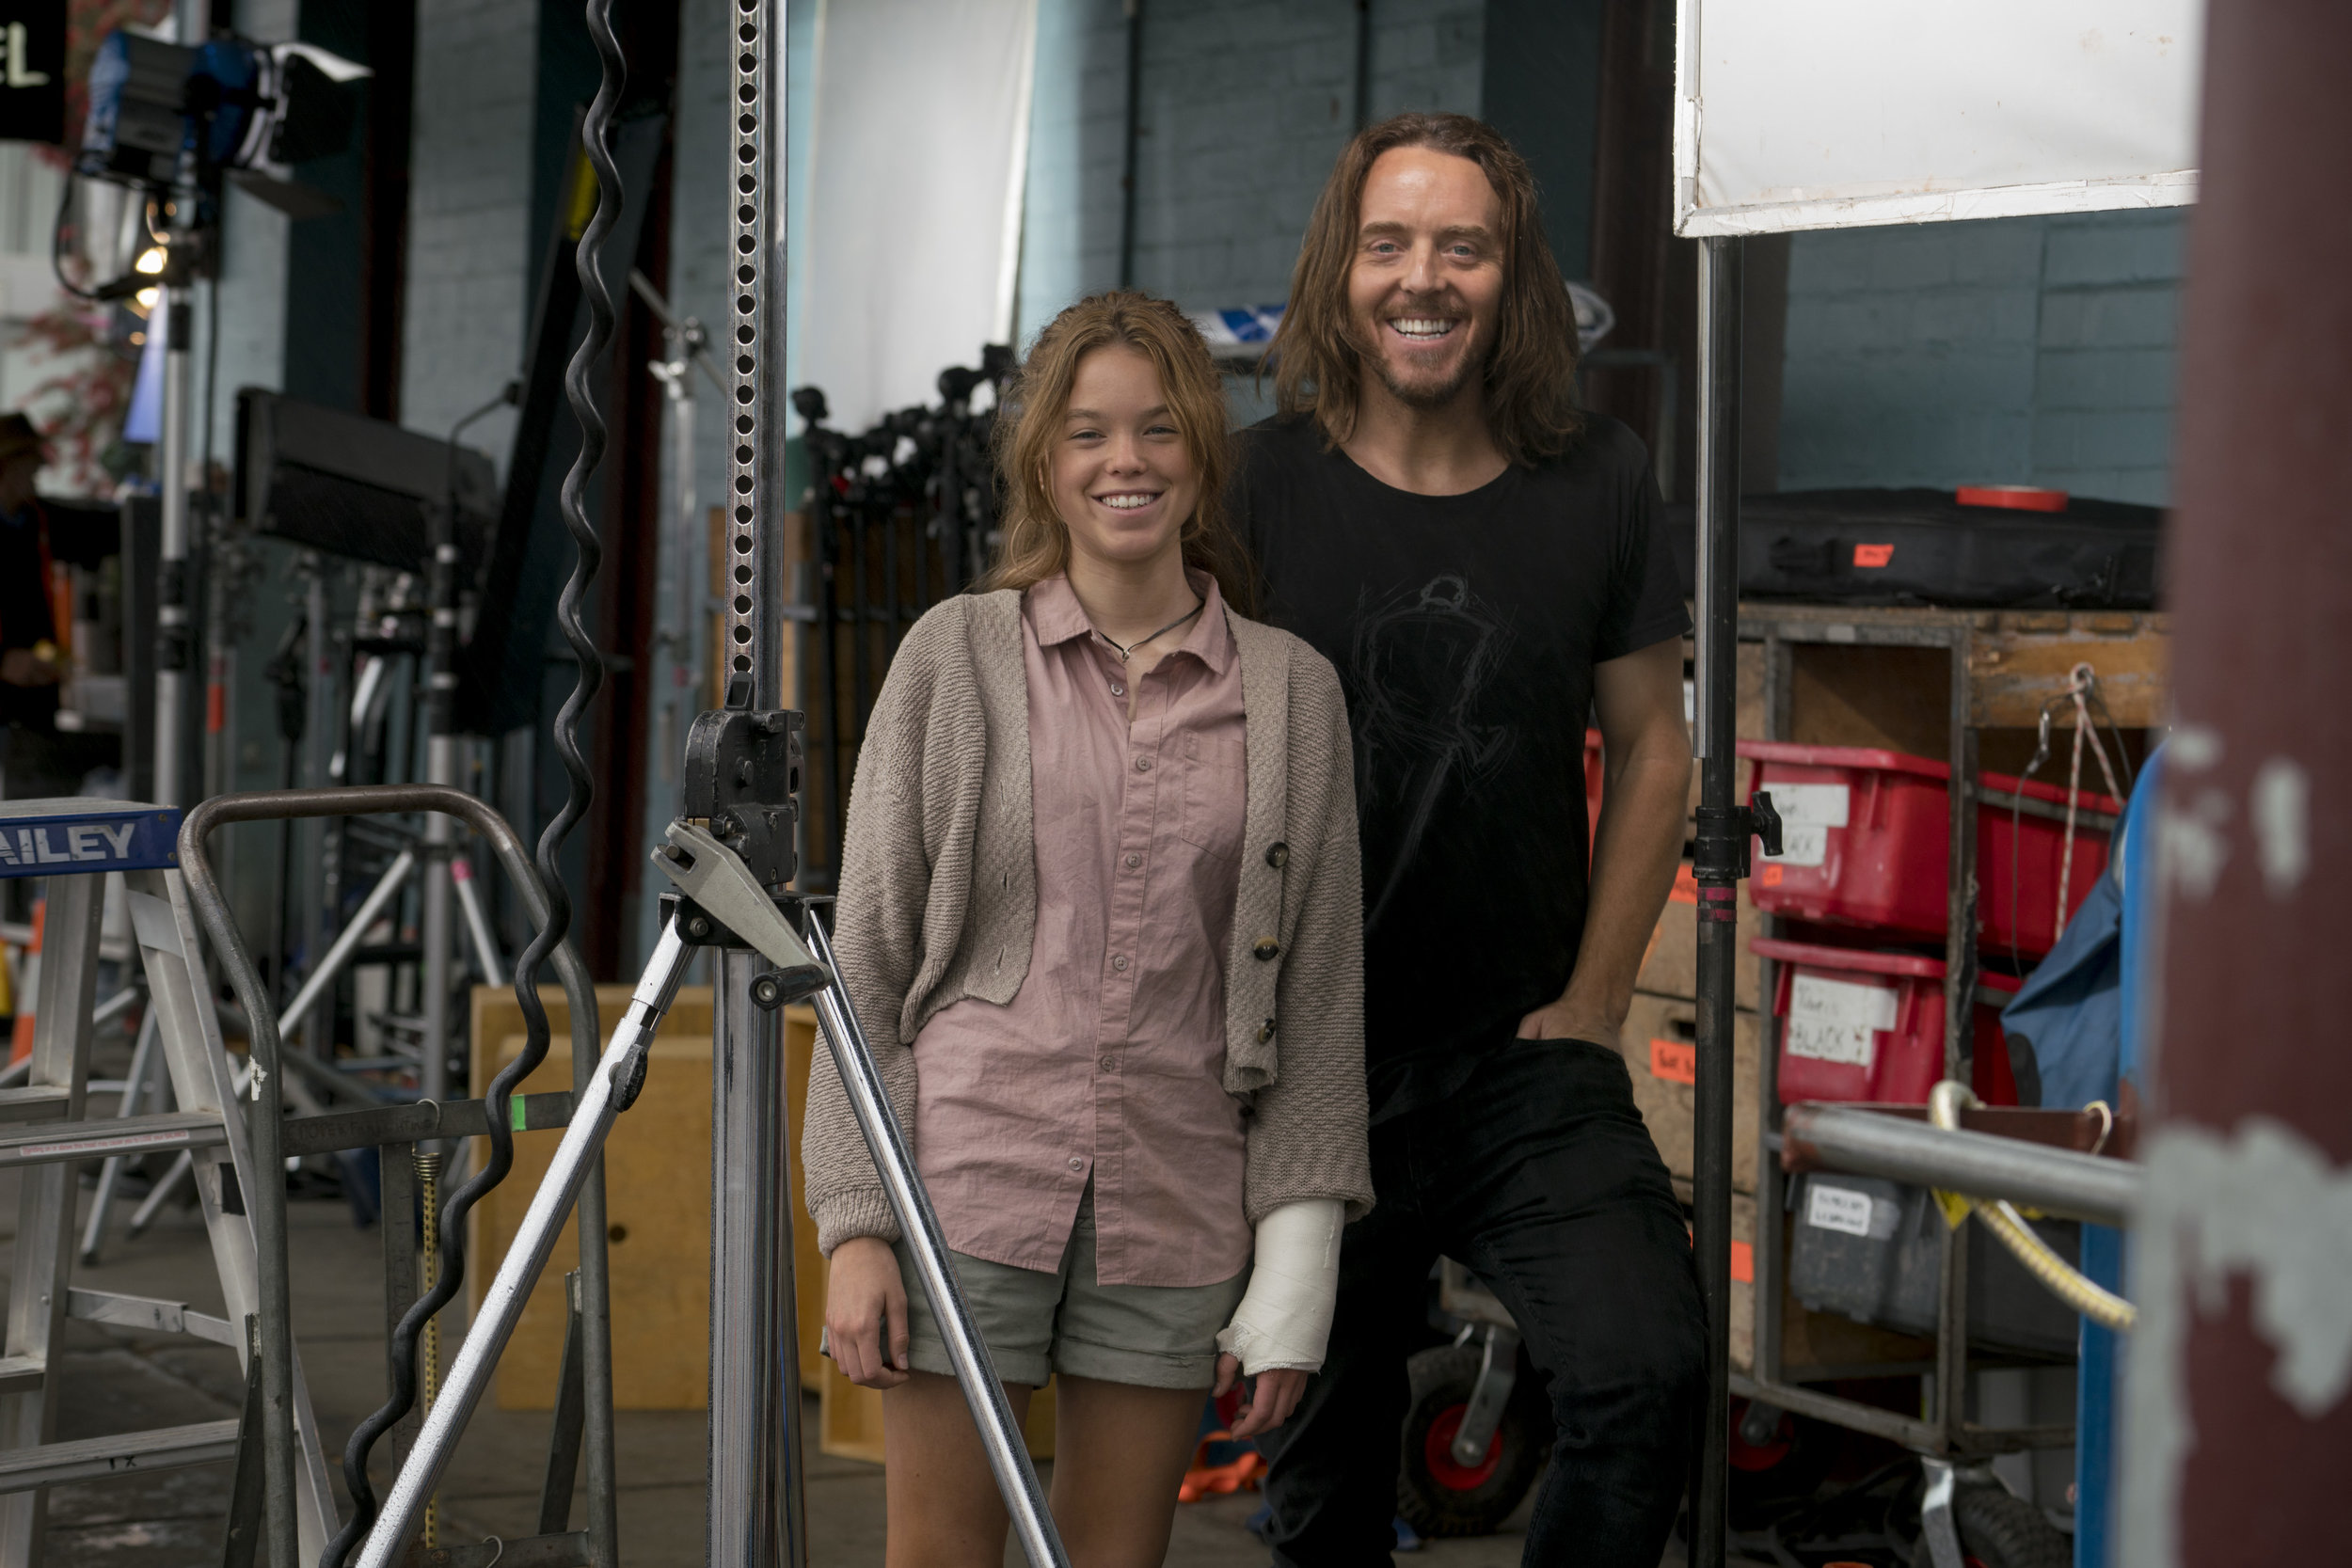   Milly Alcock and Tim Minchin  image - Foxtel 